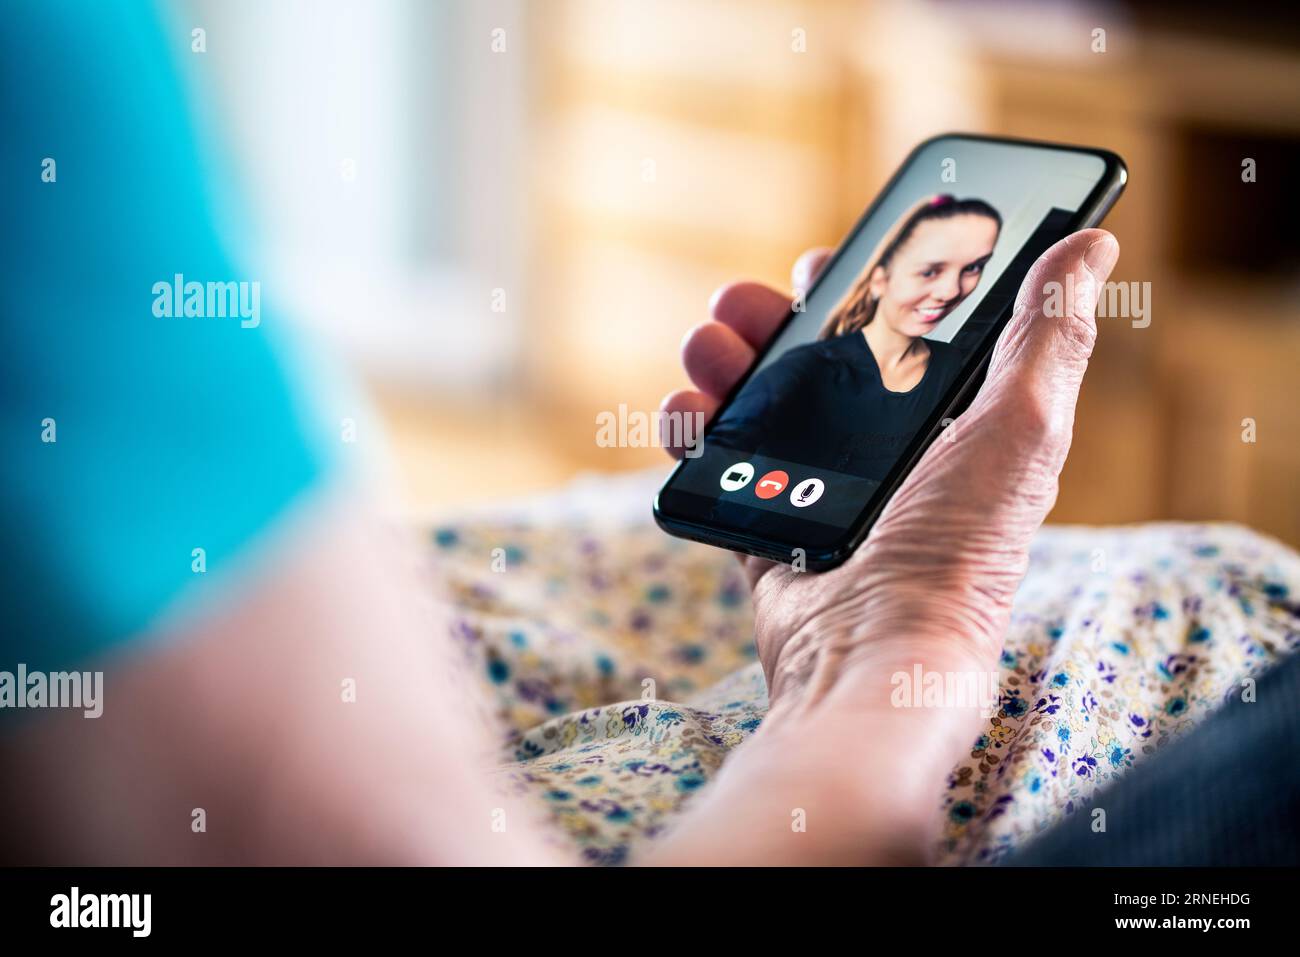 Video call with family. Mobile phone videocall. Old senior lady and young woman. Grandma and granddaughter talking online. Stock Photo